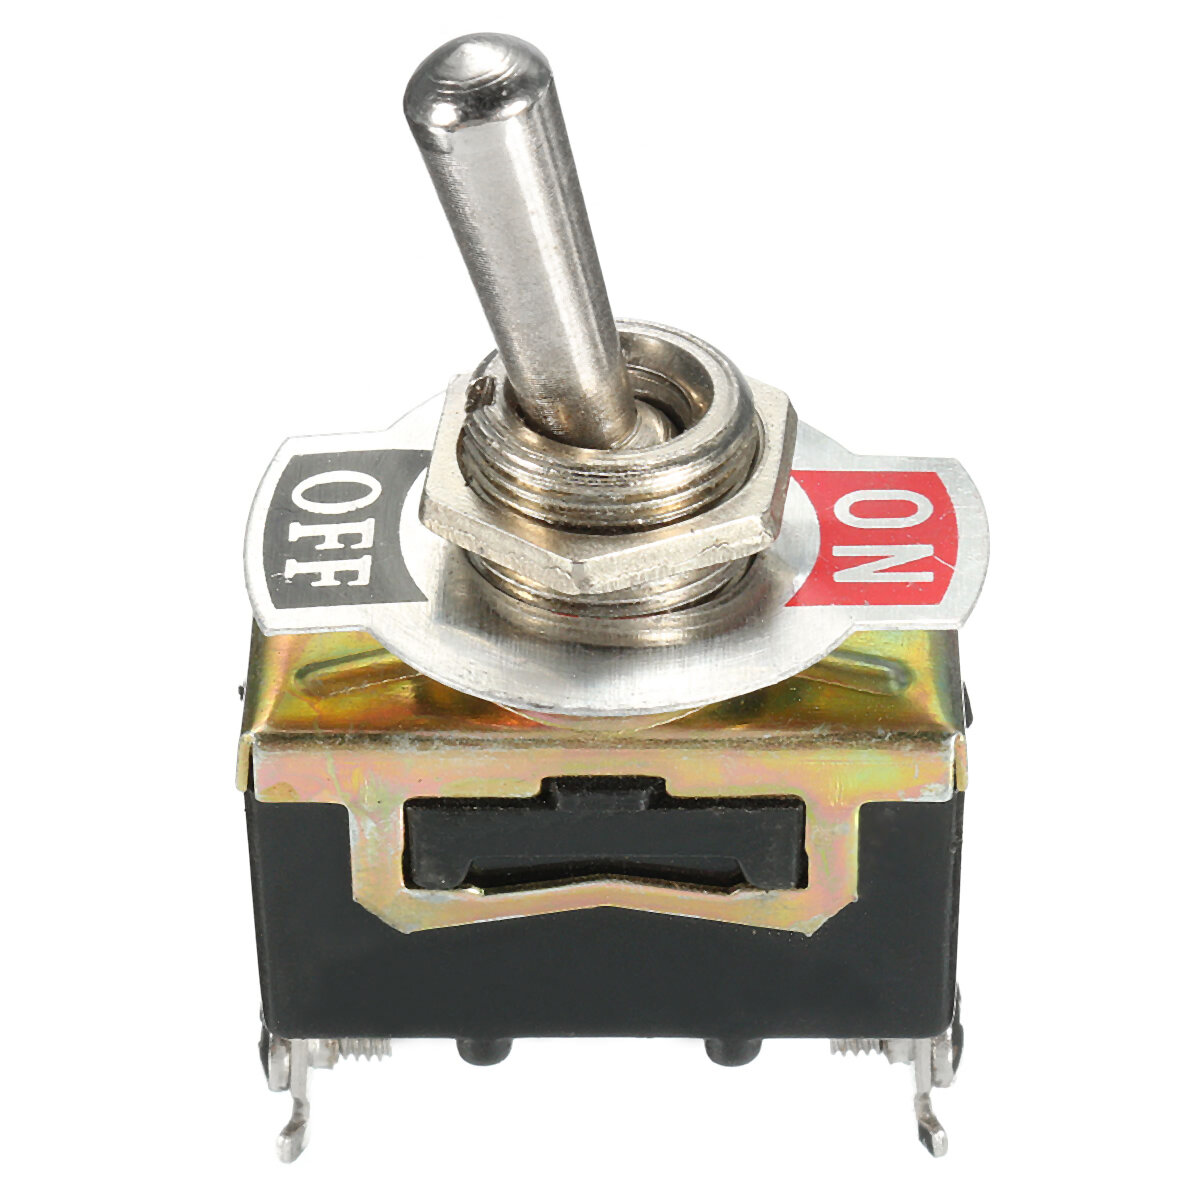 Details about   New SPST 2Pin Heavy Duty 15A 250V ON/OFF Rocker Toggle Switch 